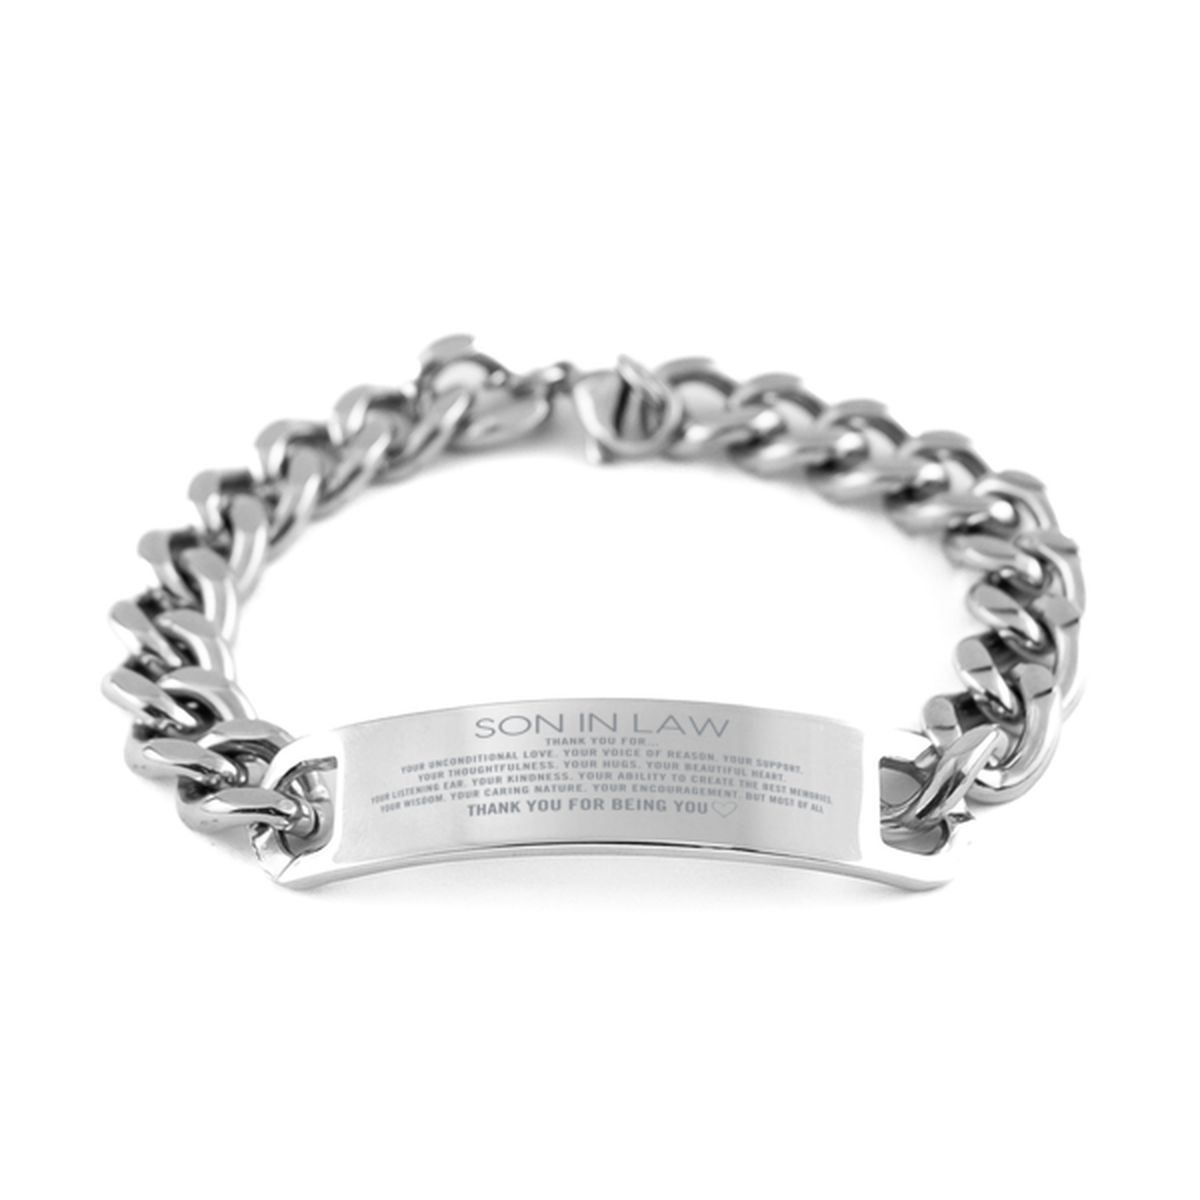 Son In Law Cuban Chain Stainless Steel Bracelet Custom, Engraved Gifts For Son In Law Christmas Graduation Birthday Gifts for Men Women Son In Law Thank you for Your unconditional love